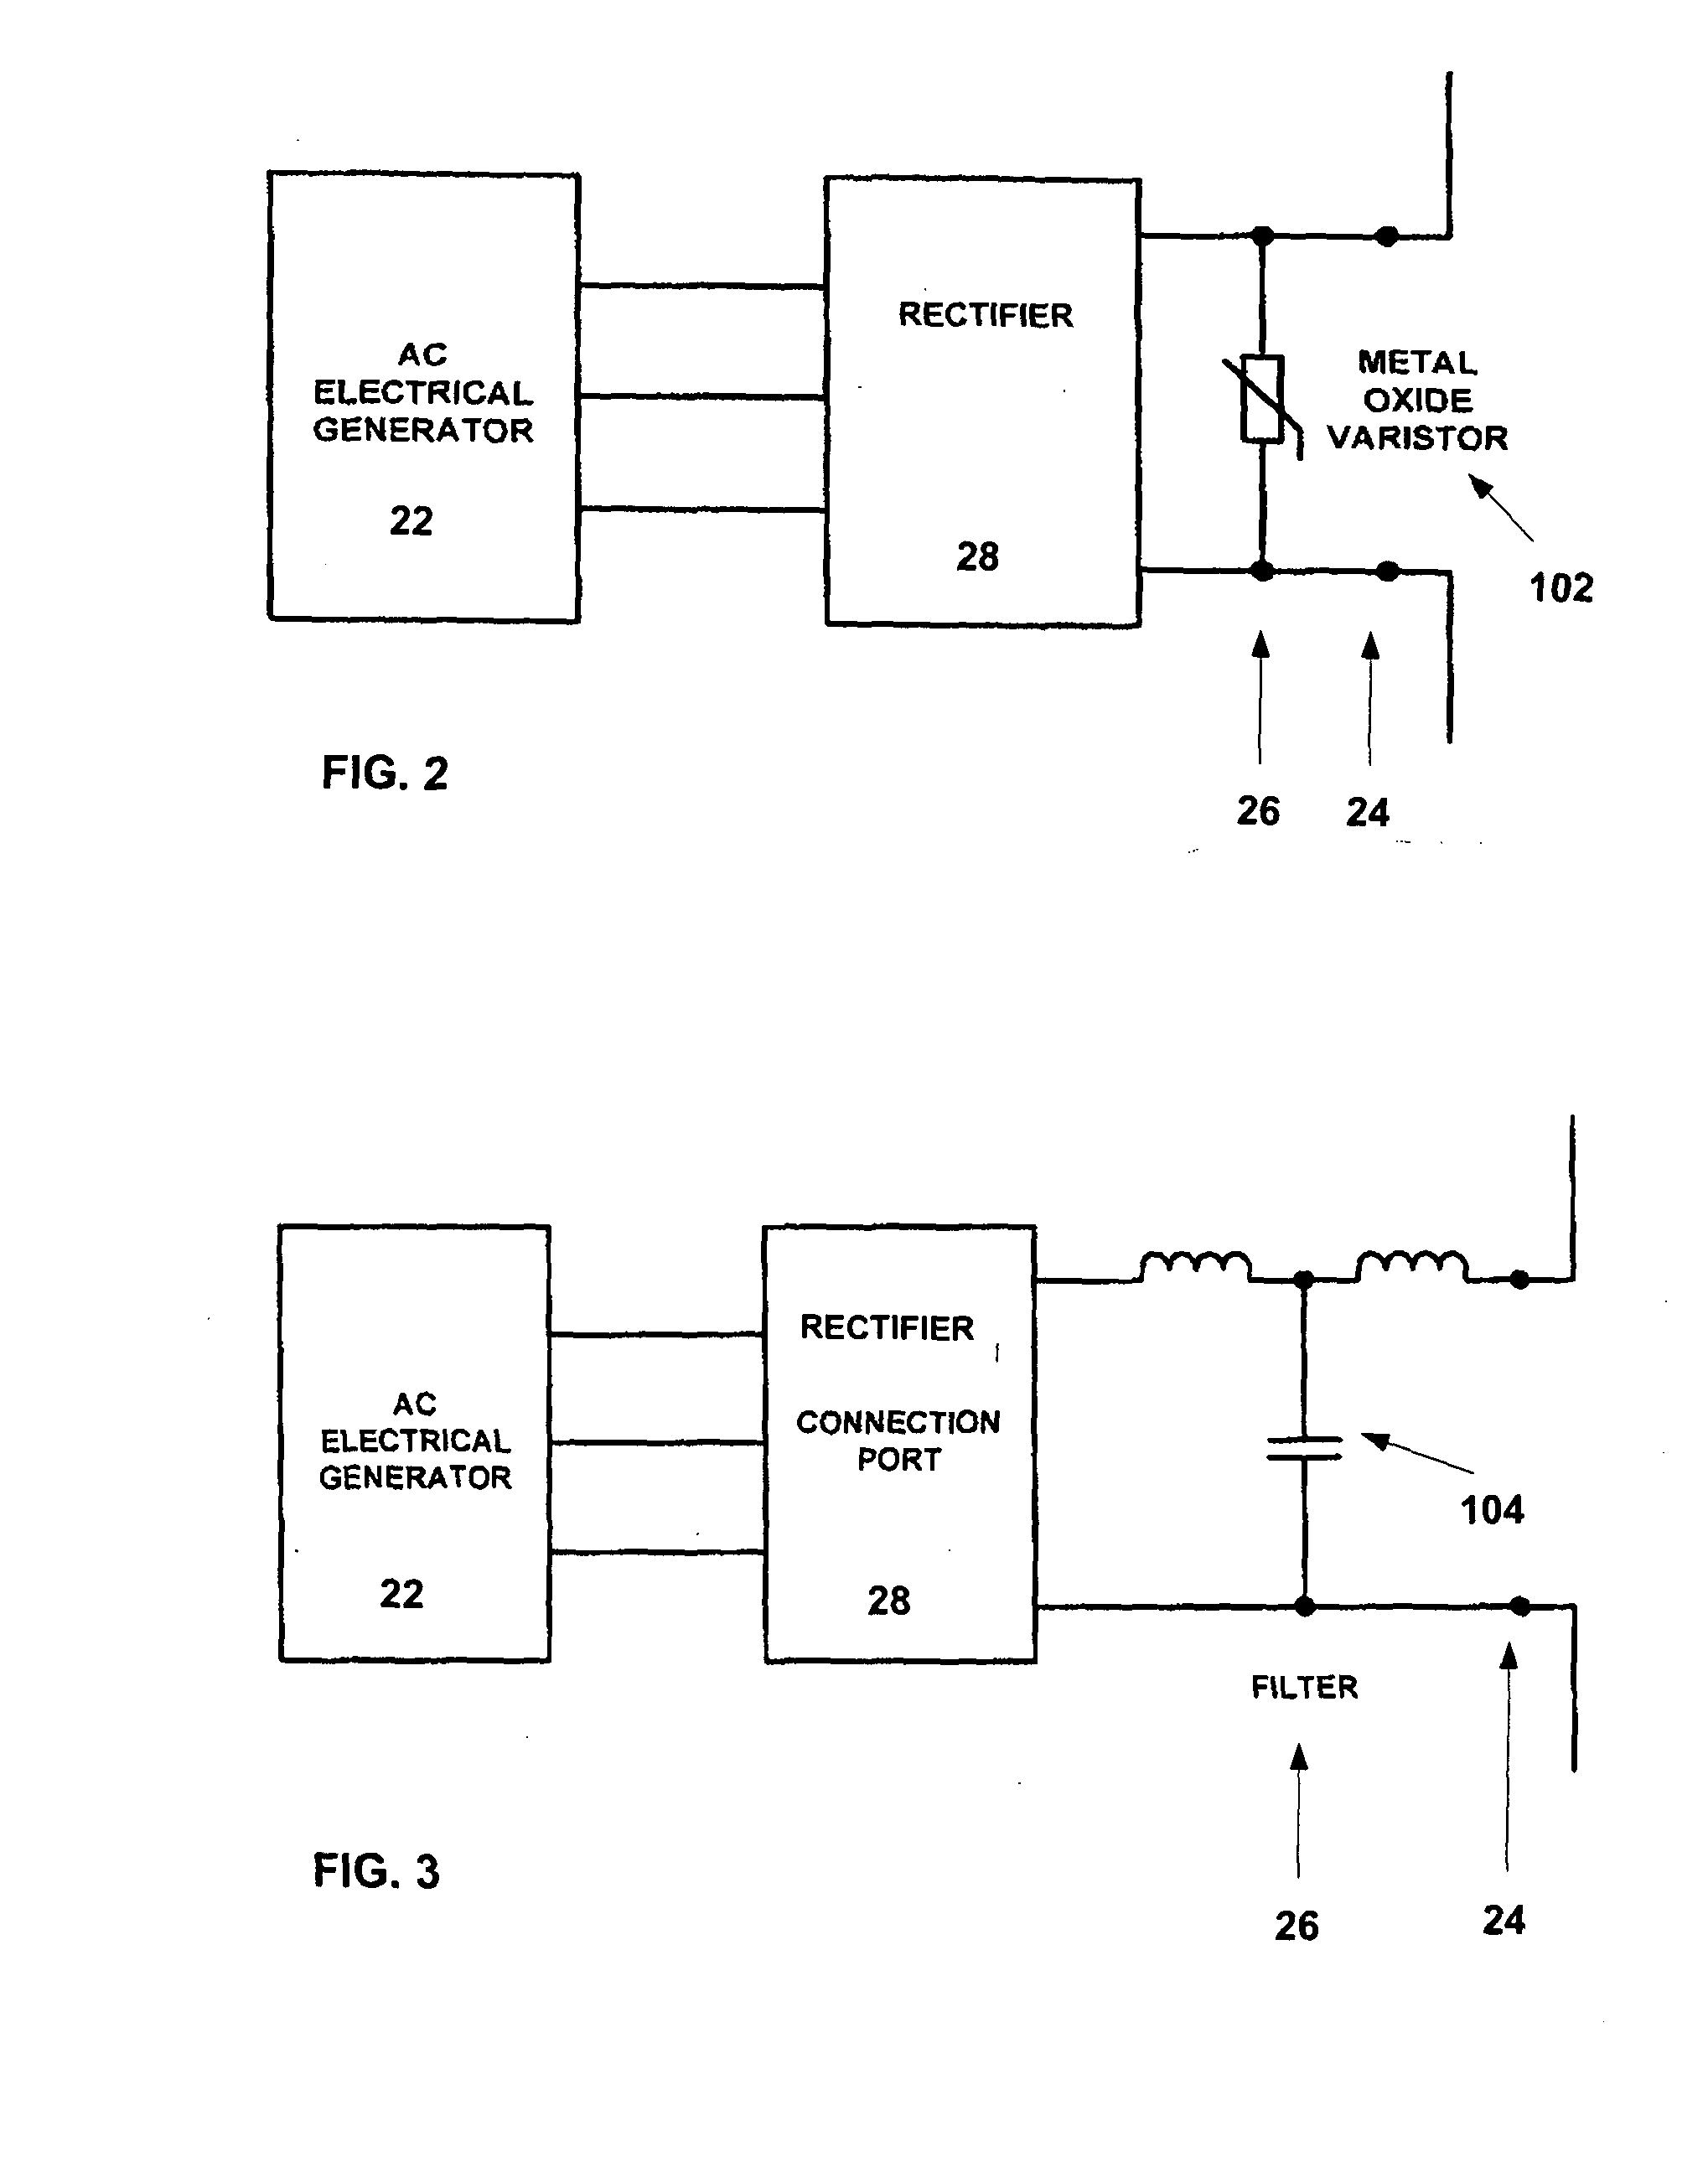 Electrical energy and distribution system